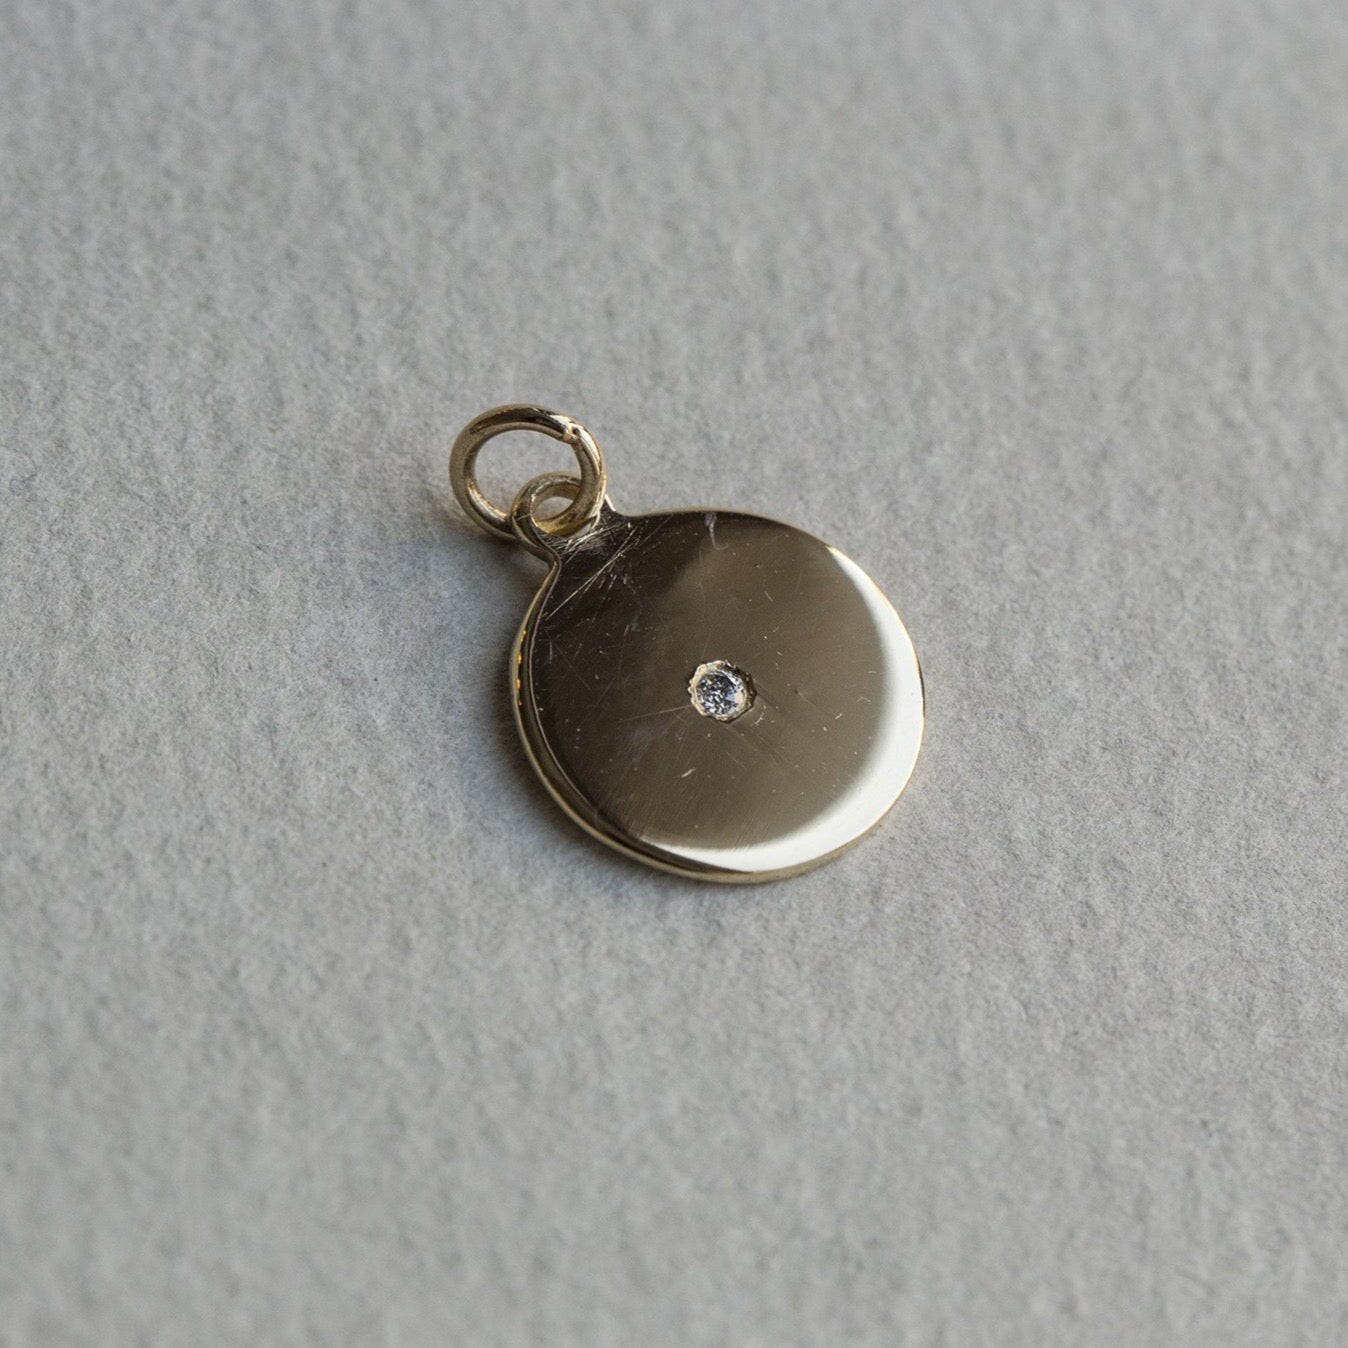 felt's own design - incredibly simple and enchanting polished gold disc with diamond